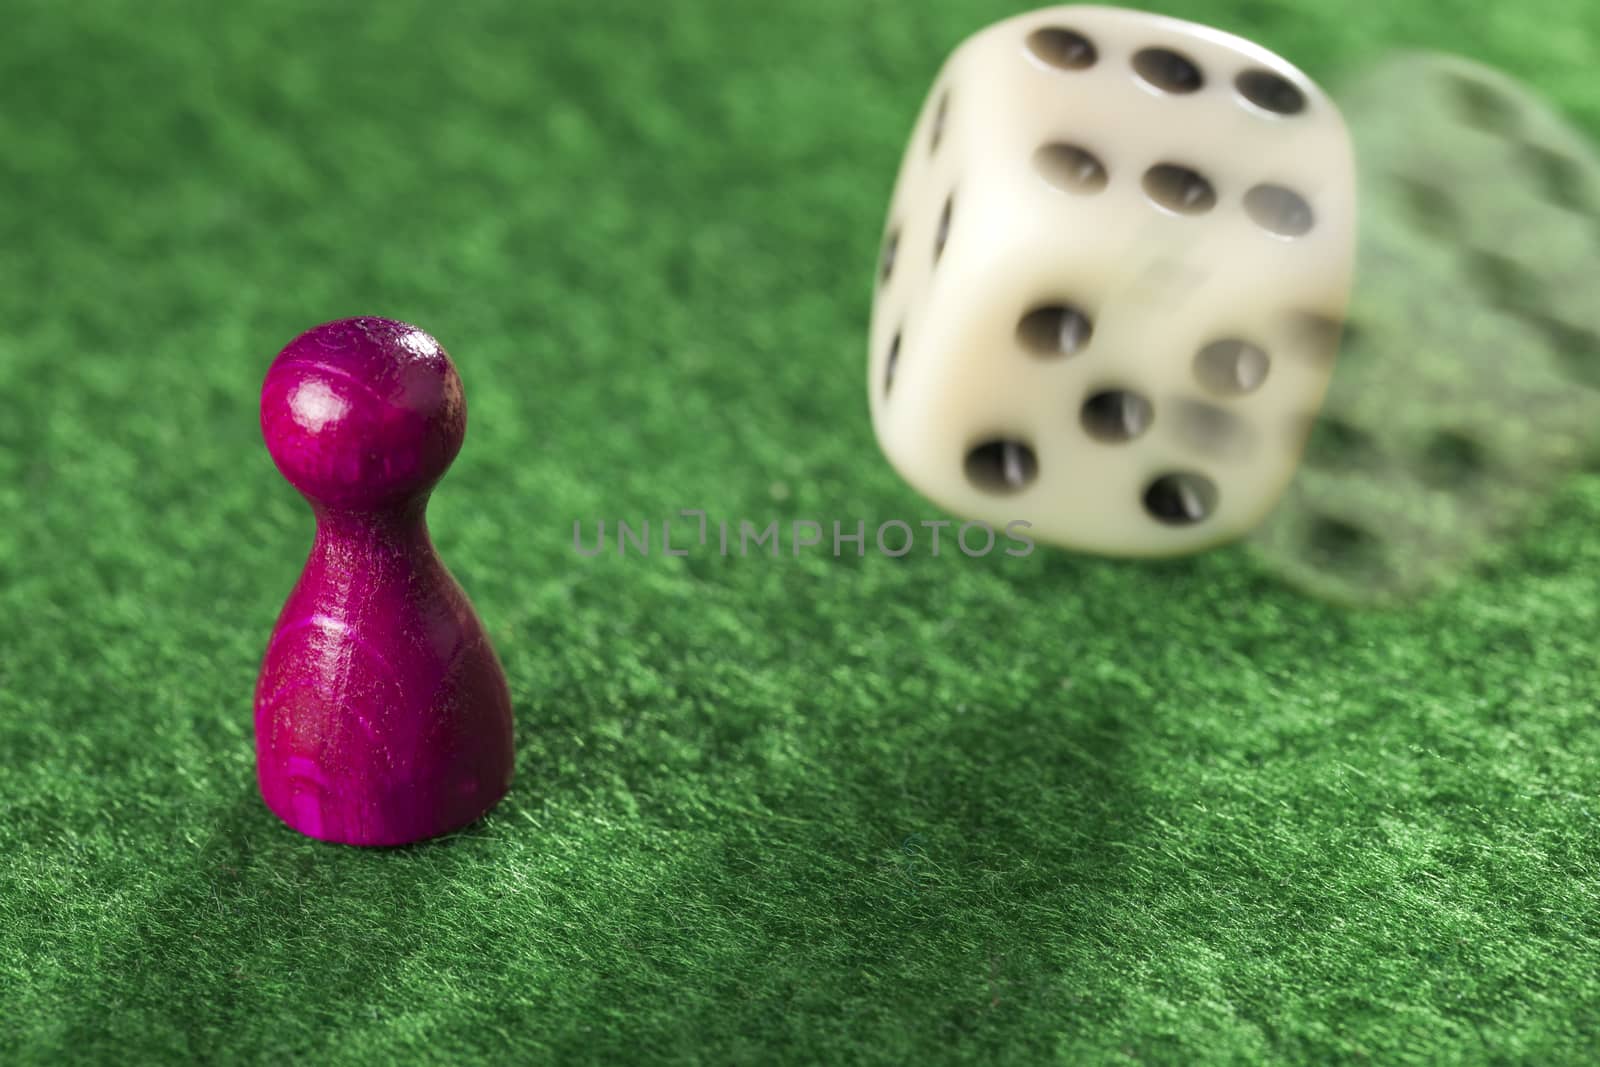 Pawn and a dice in motion for playing games